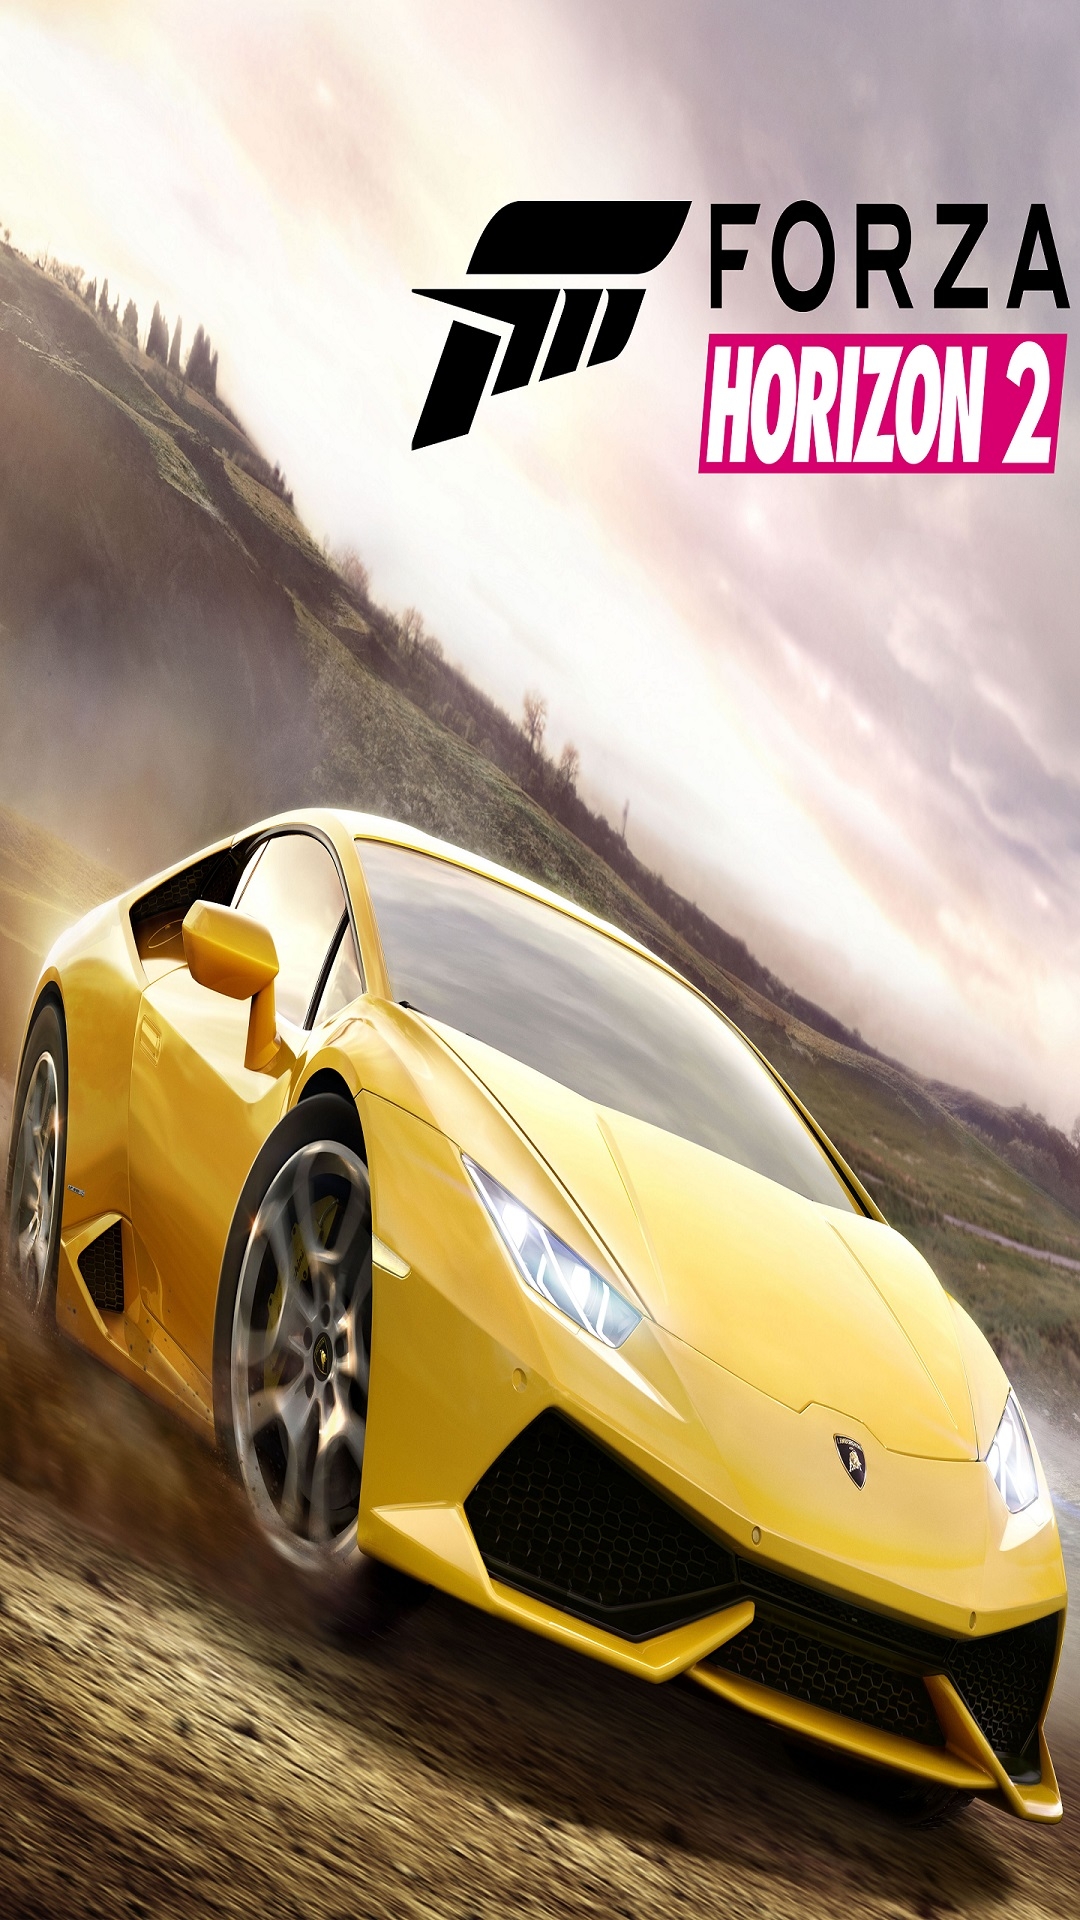 Forza Horizon 2 for Apple iPhone 6S & 7 Plus resolution